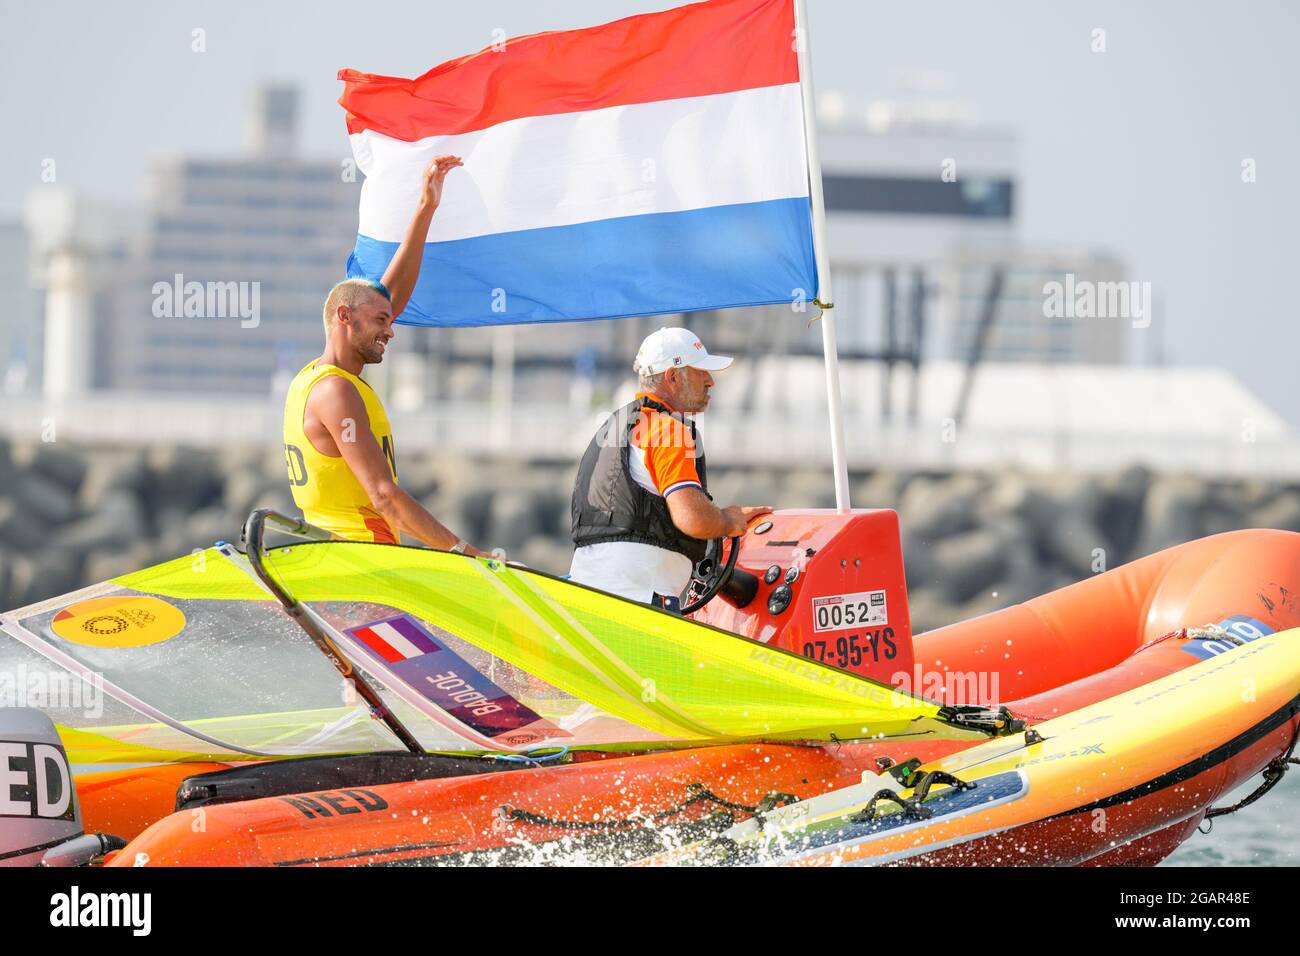 TOKYO, JAPAN - JULY 31: Kiran Badloe of the Netherlands celebrating his golden medal win competing on Men's Windsufer - RS:X during the Tokyo 2020 Olympic Games at the Sagami on July 31, 2021 in Tokyo, Japan (Photo by Ronald Hoogendoorn/Orange Pictures) NOCNSF Stock Photo